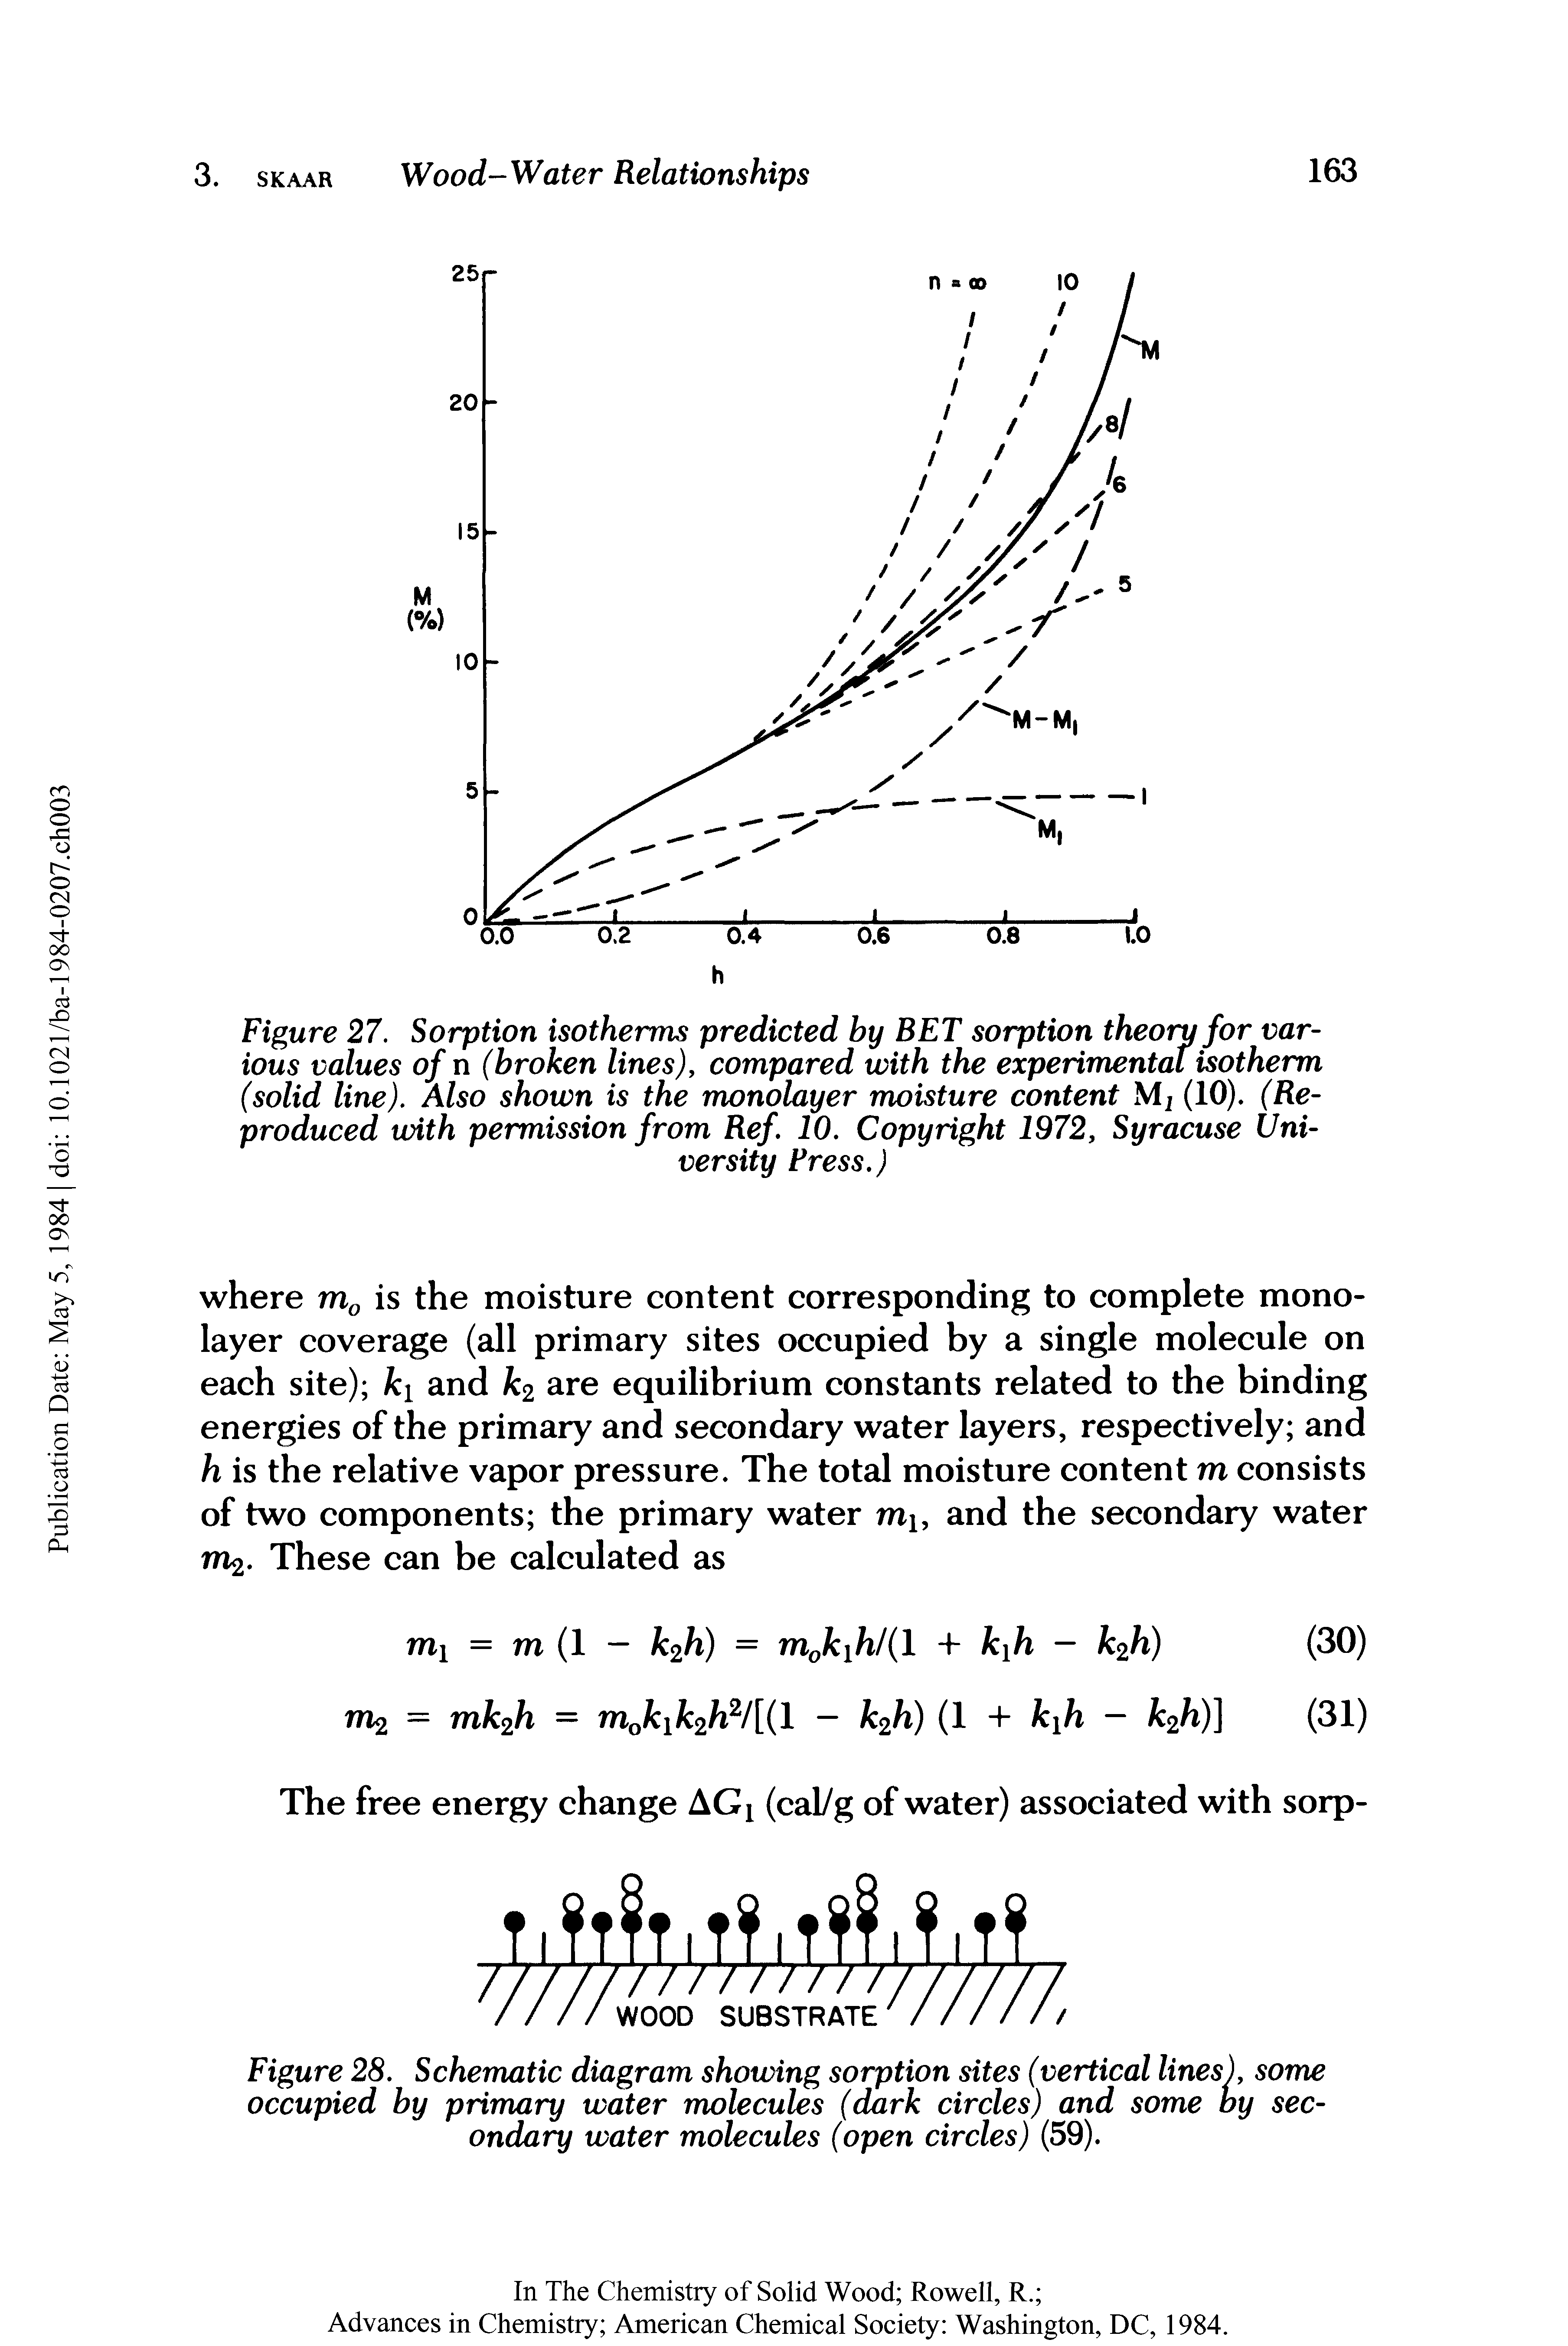 Figure 27. Sorption isotherms predicted by BET sorption theory for various values of n (broken lines), compared with the experimental isotherm (solid line). Also shown is the monolayer moisture content Mj (10). (Reproduced with permission from Ref 10. Copyright 1972, Syracuse University Fress.)...